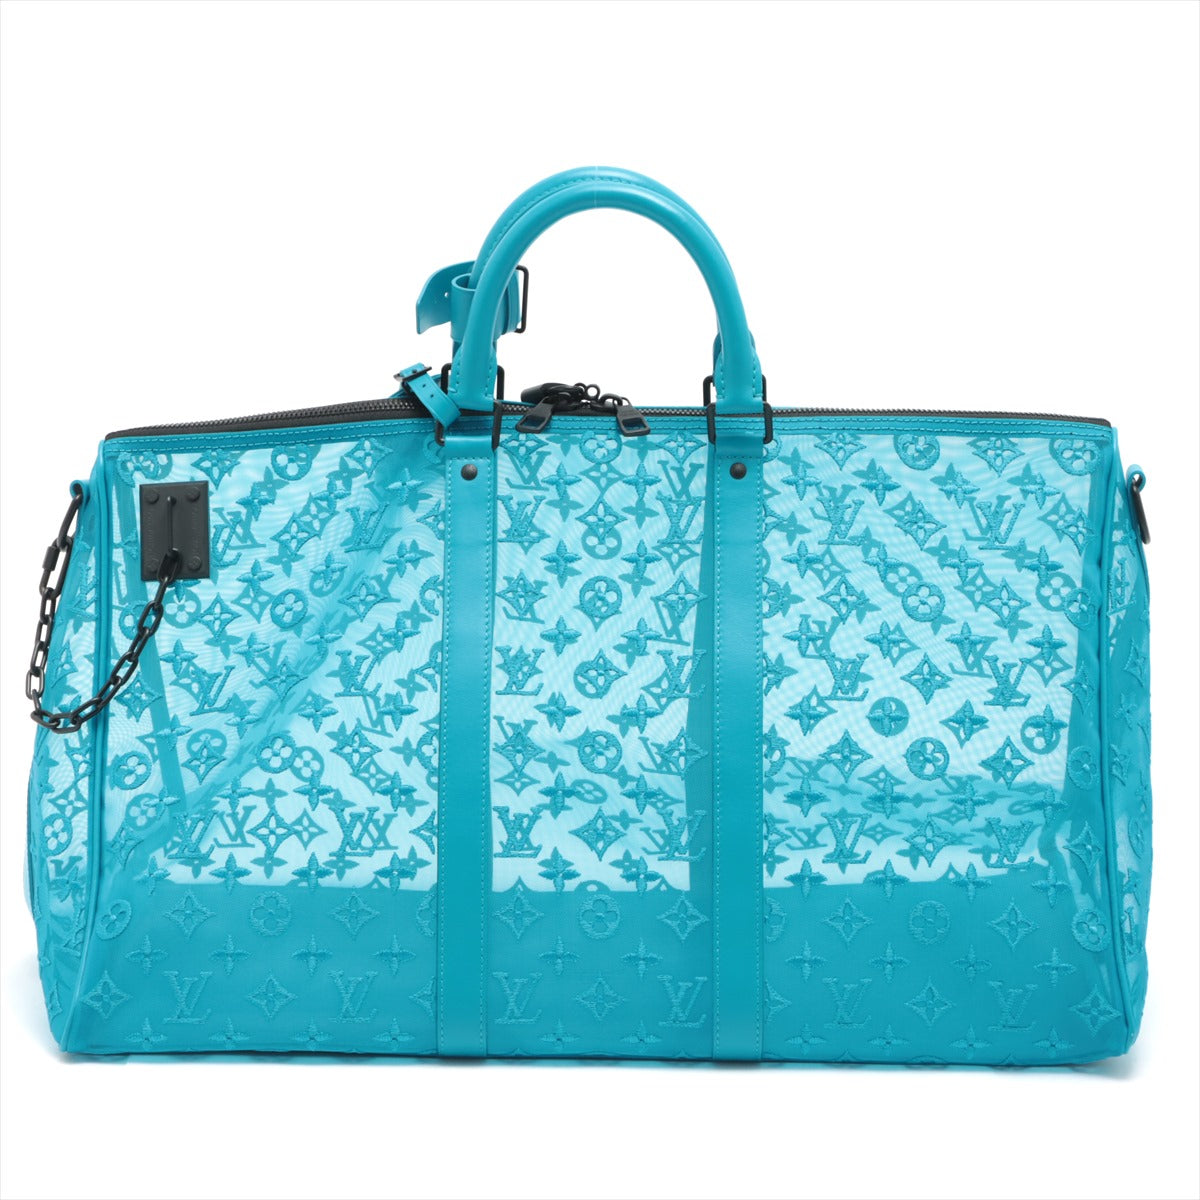 Louis Vuitton Limited Edition Keepall Bag